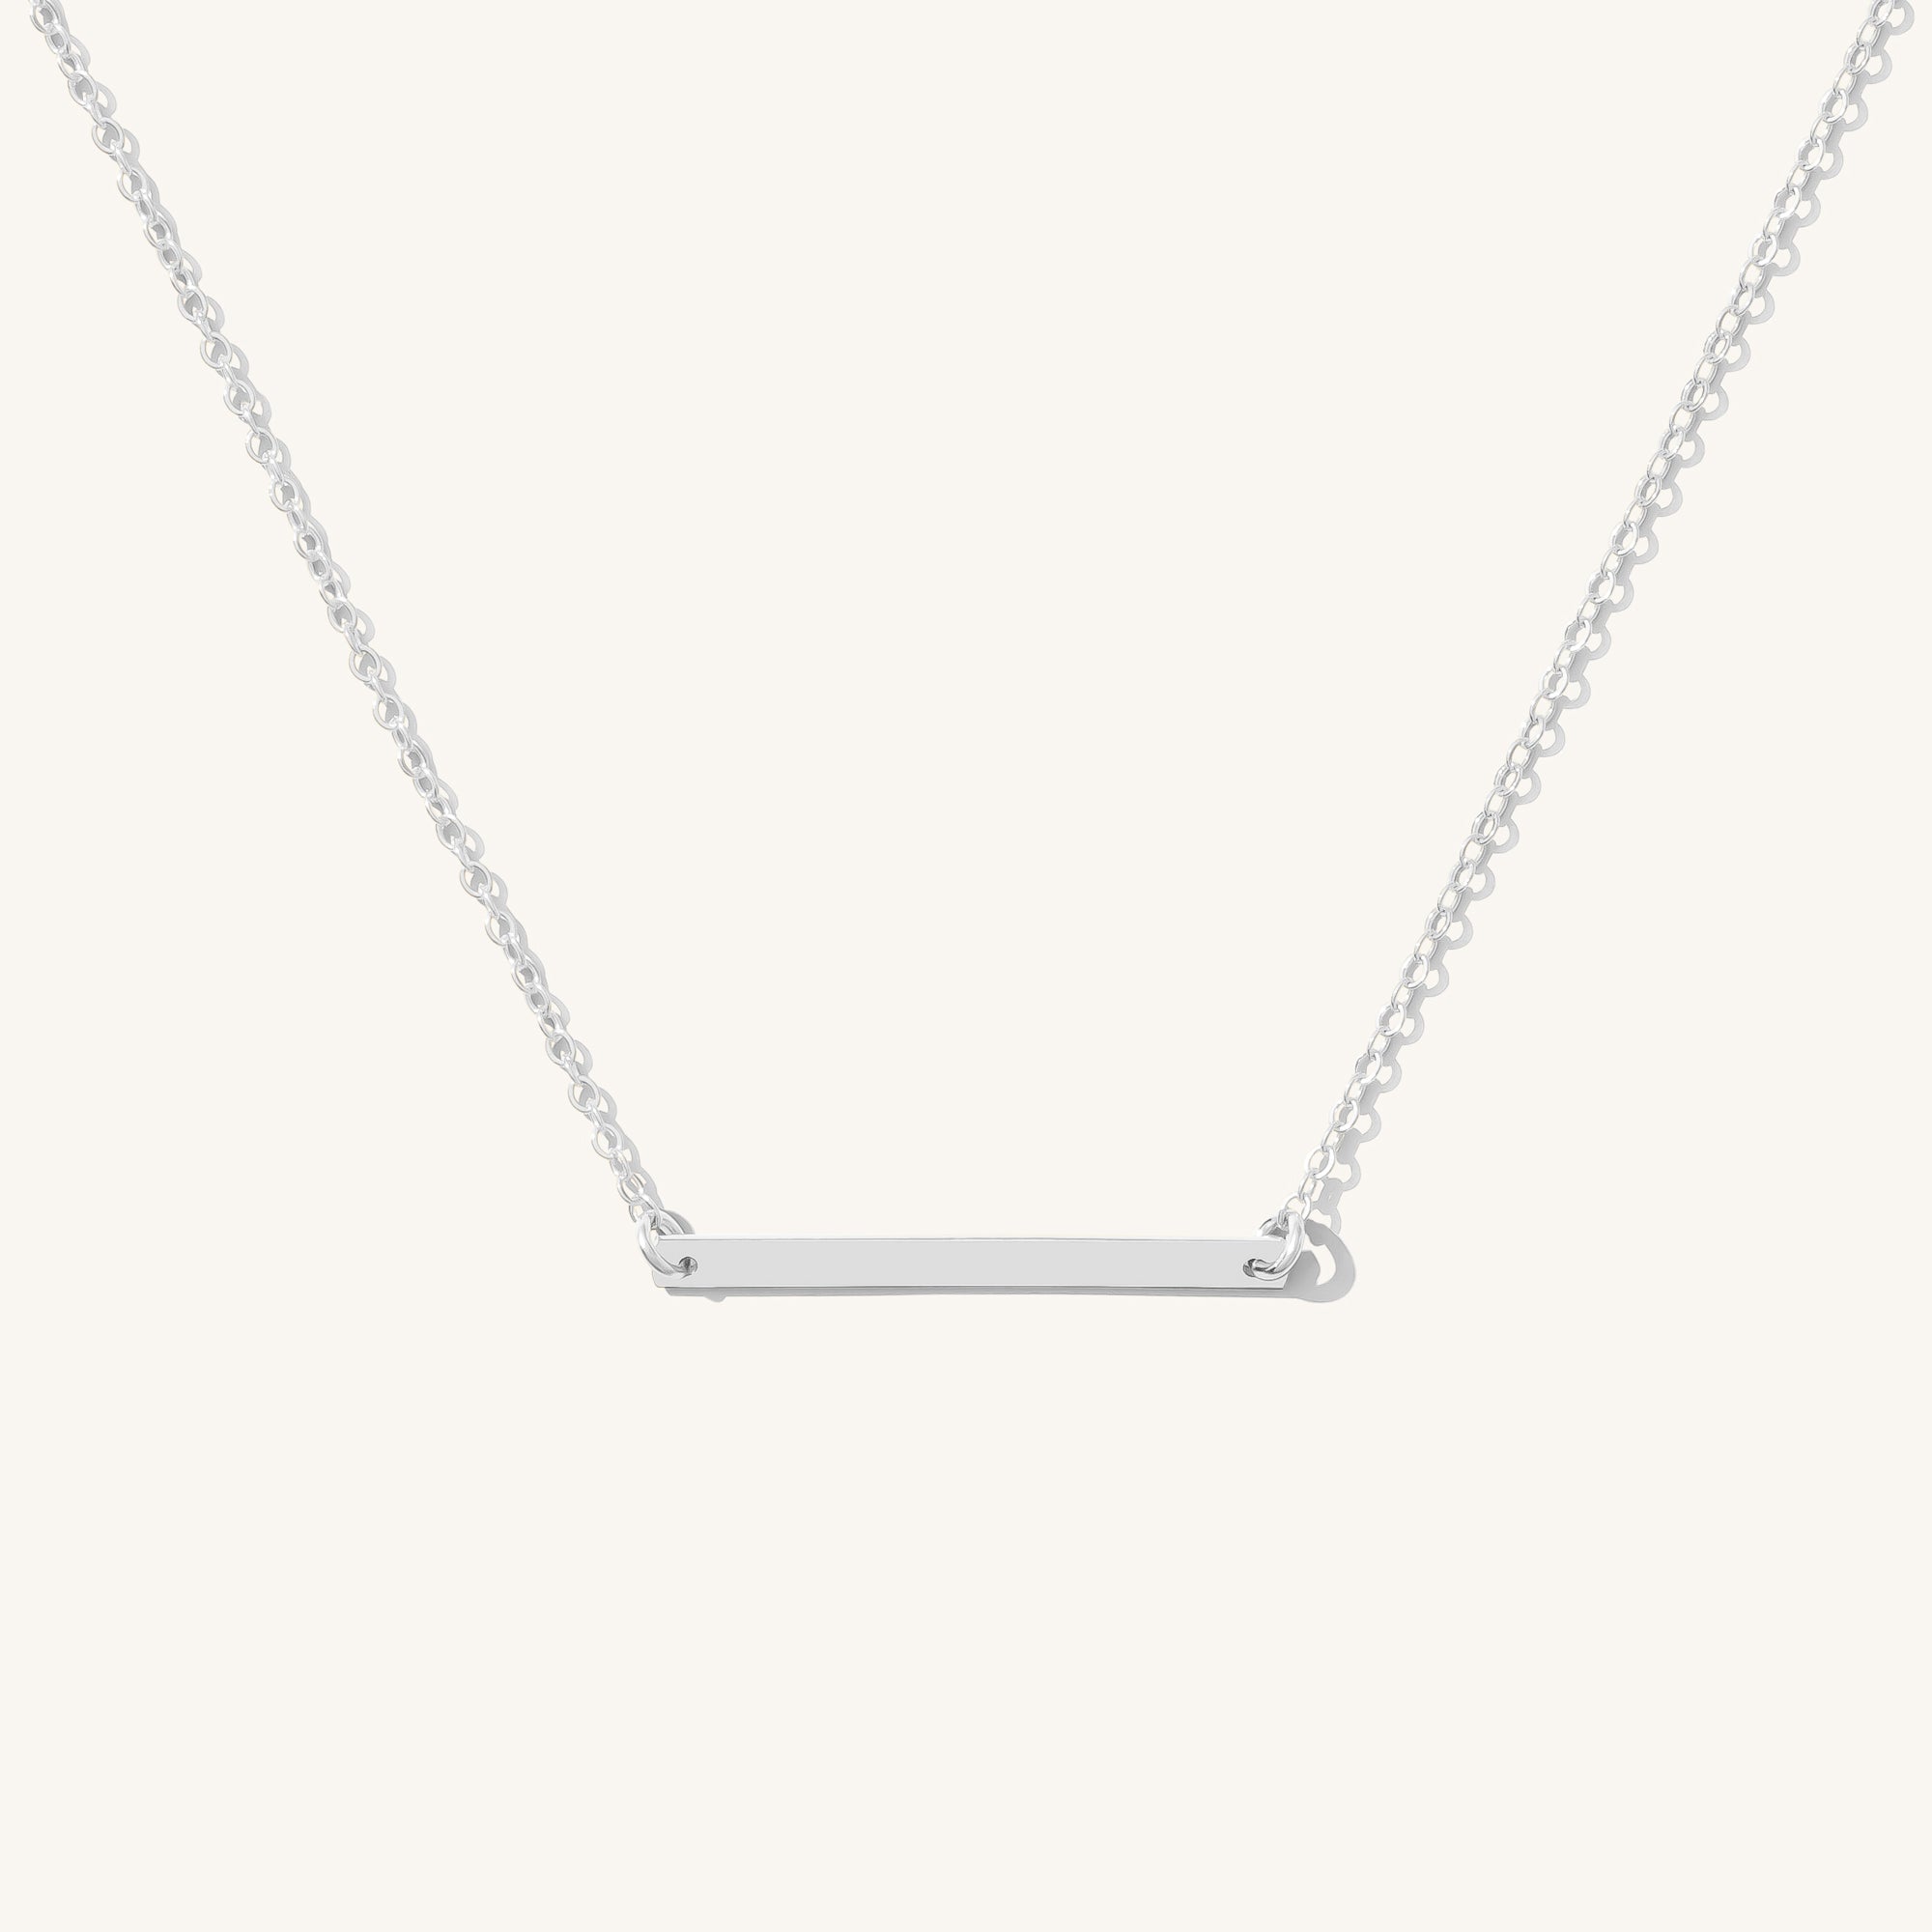 Dainty Sterling Silver Beaded Necklace, Silver Beads Bar Necklace